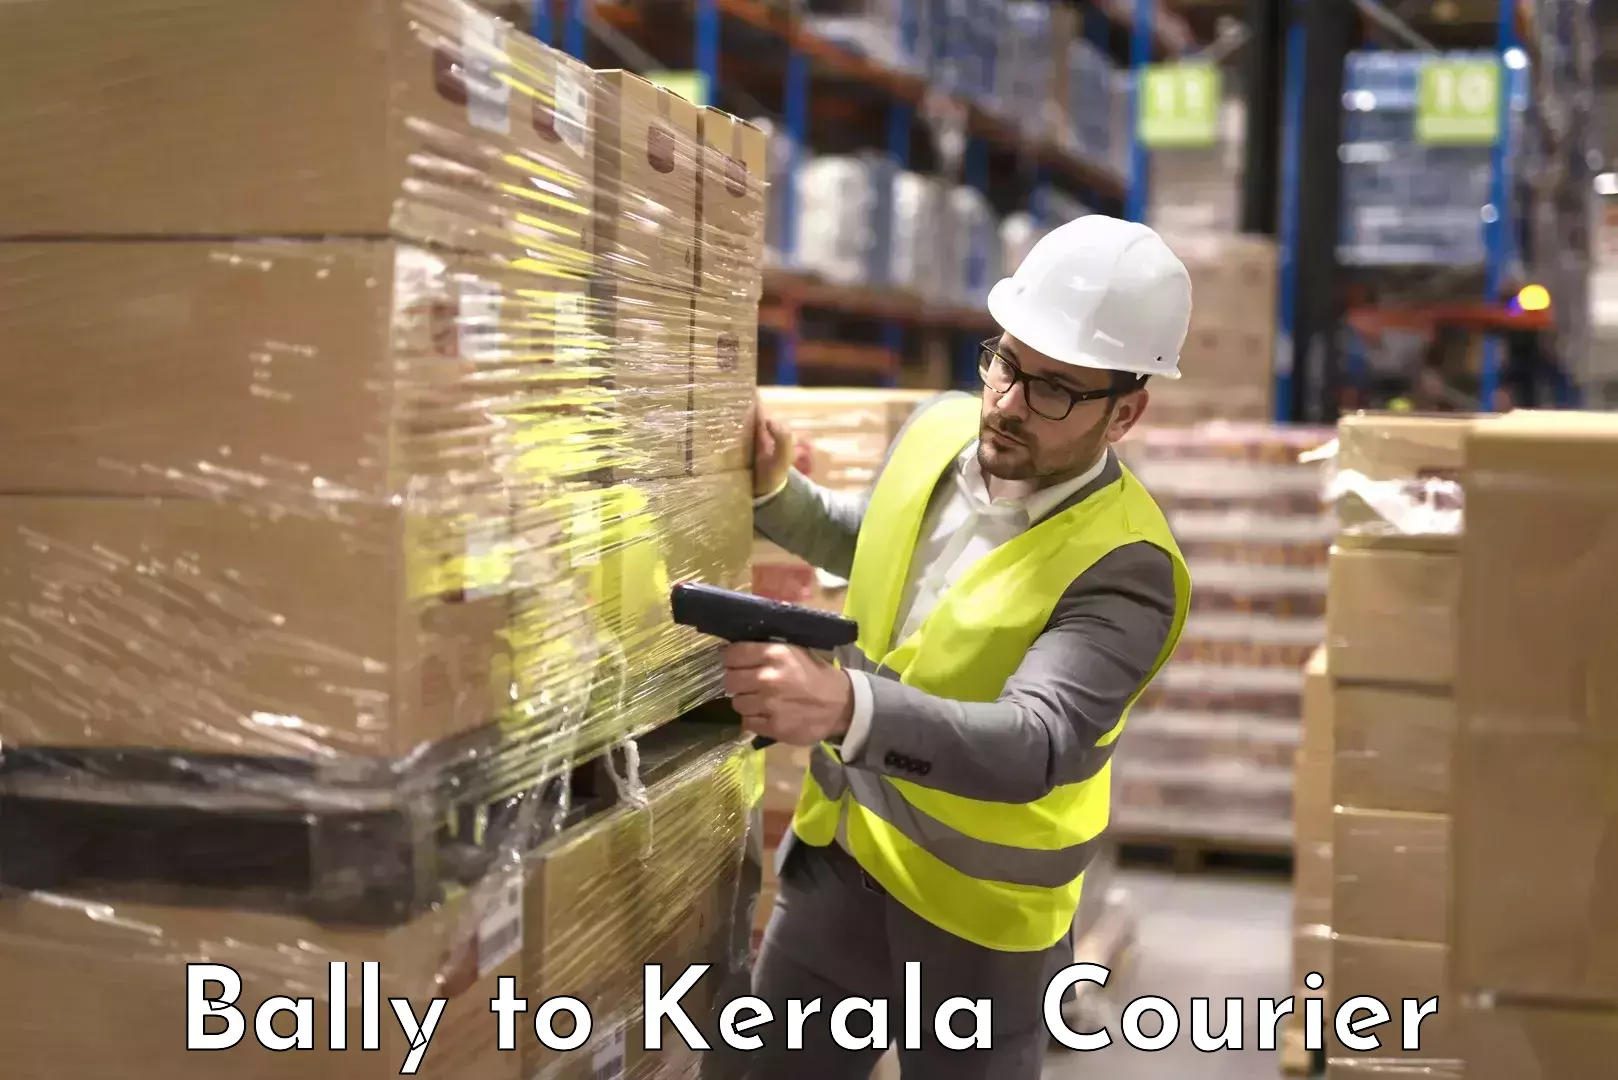 Emergency baggage service in Bally to Kerala